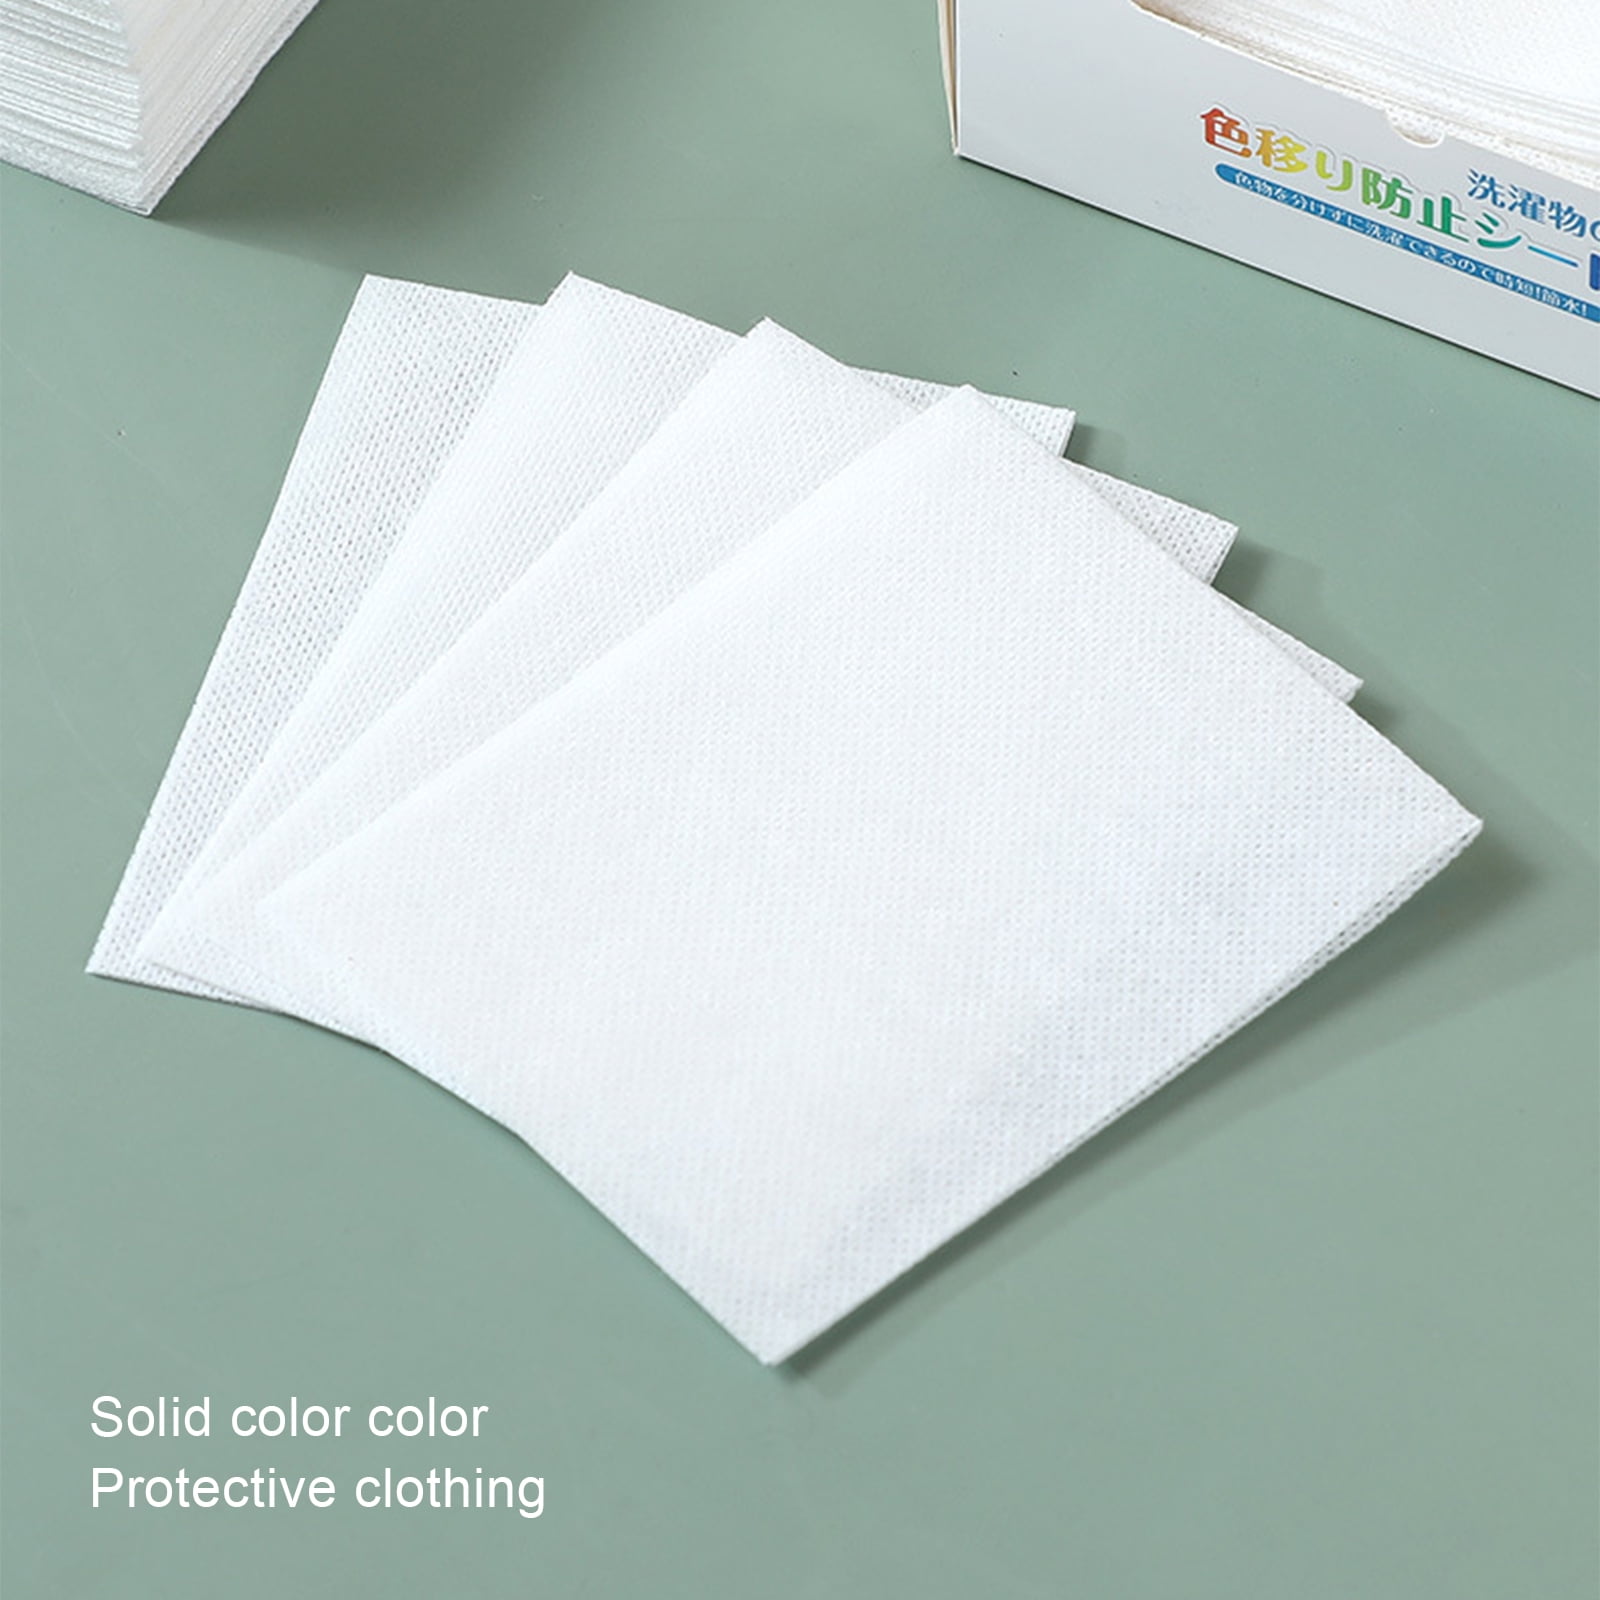 1box Anti-Dyeing Cloth, Color Catcher Dye Trapping Sheet, Color Catcher For  Laundry, Cleaning Laundry Coloring Sheet, Preventing Clothing Cross-Color  Sheet